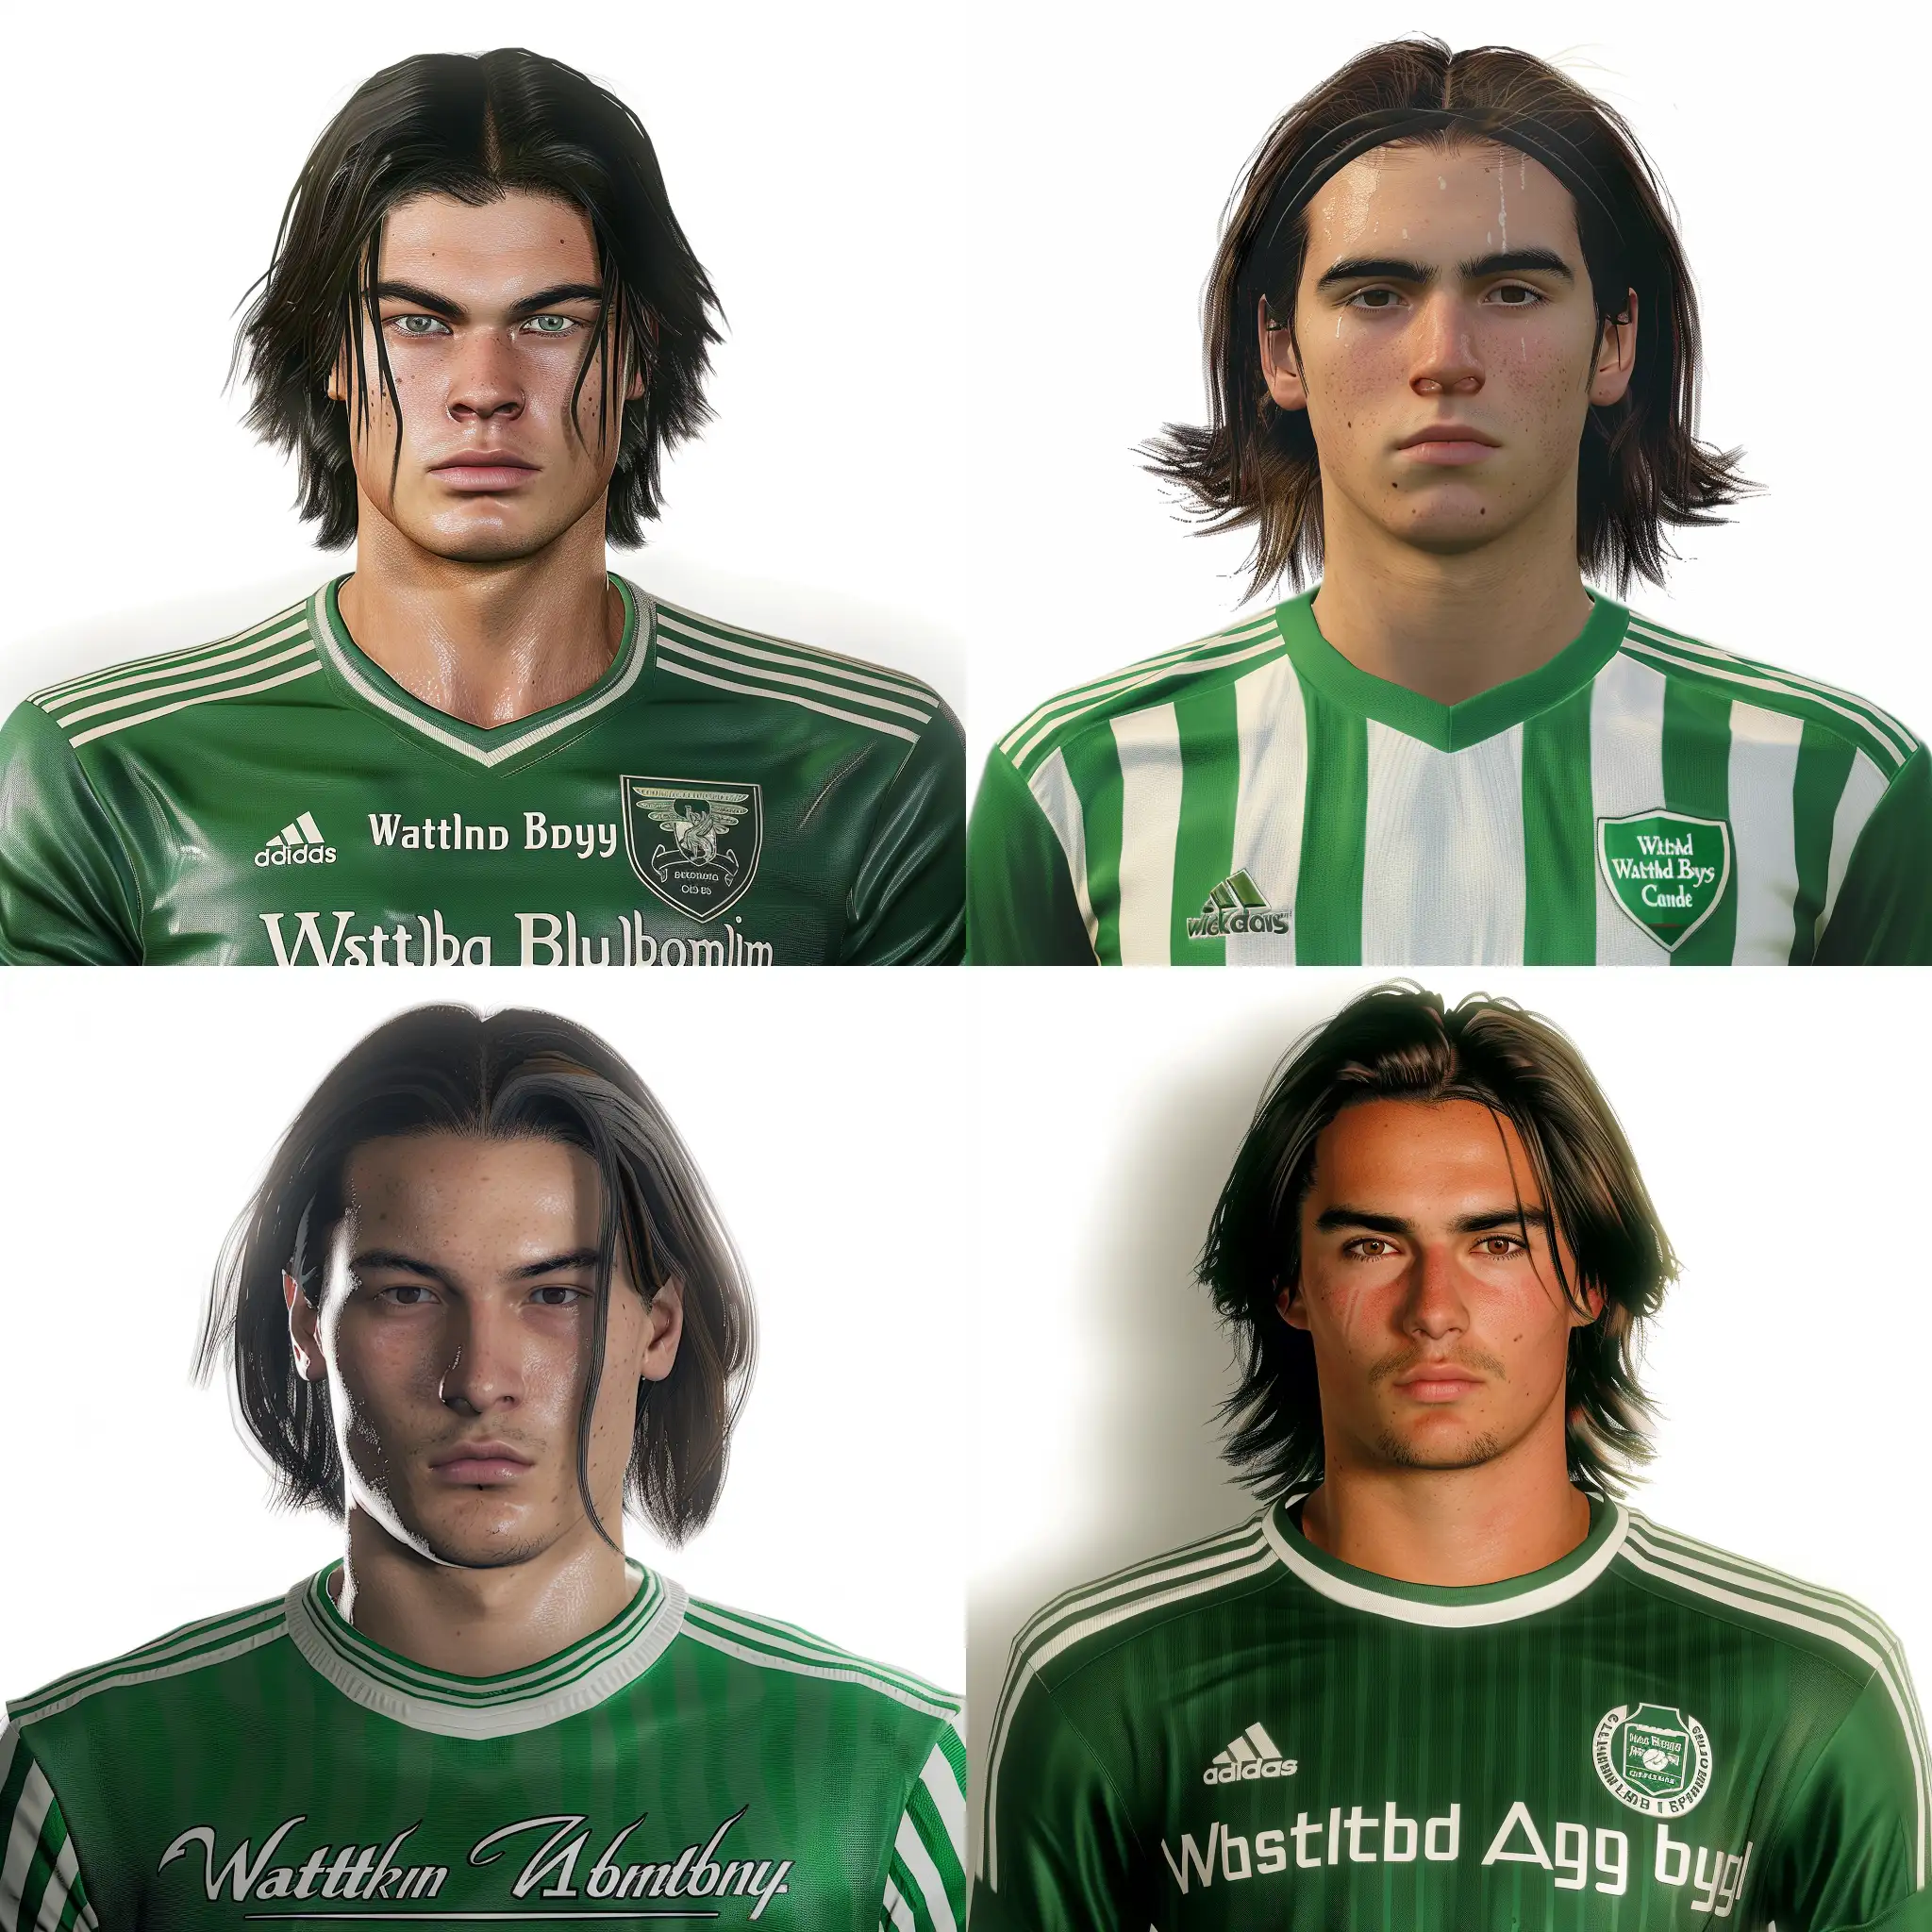 Ultra Realistic team profile photo of 16 year old football player for Waltham Abbey Football Club. Green white striped football jersey. The person is is from England and has white skin. Shoulder long dark straight hair, back-slick and unkept Has an air of arrogance. picture from a facepack from Football Manager 23.